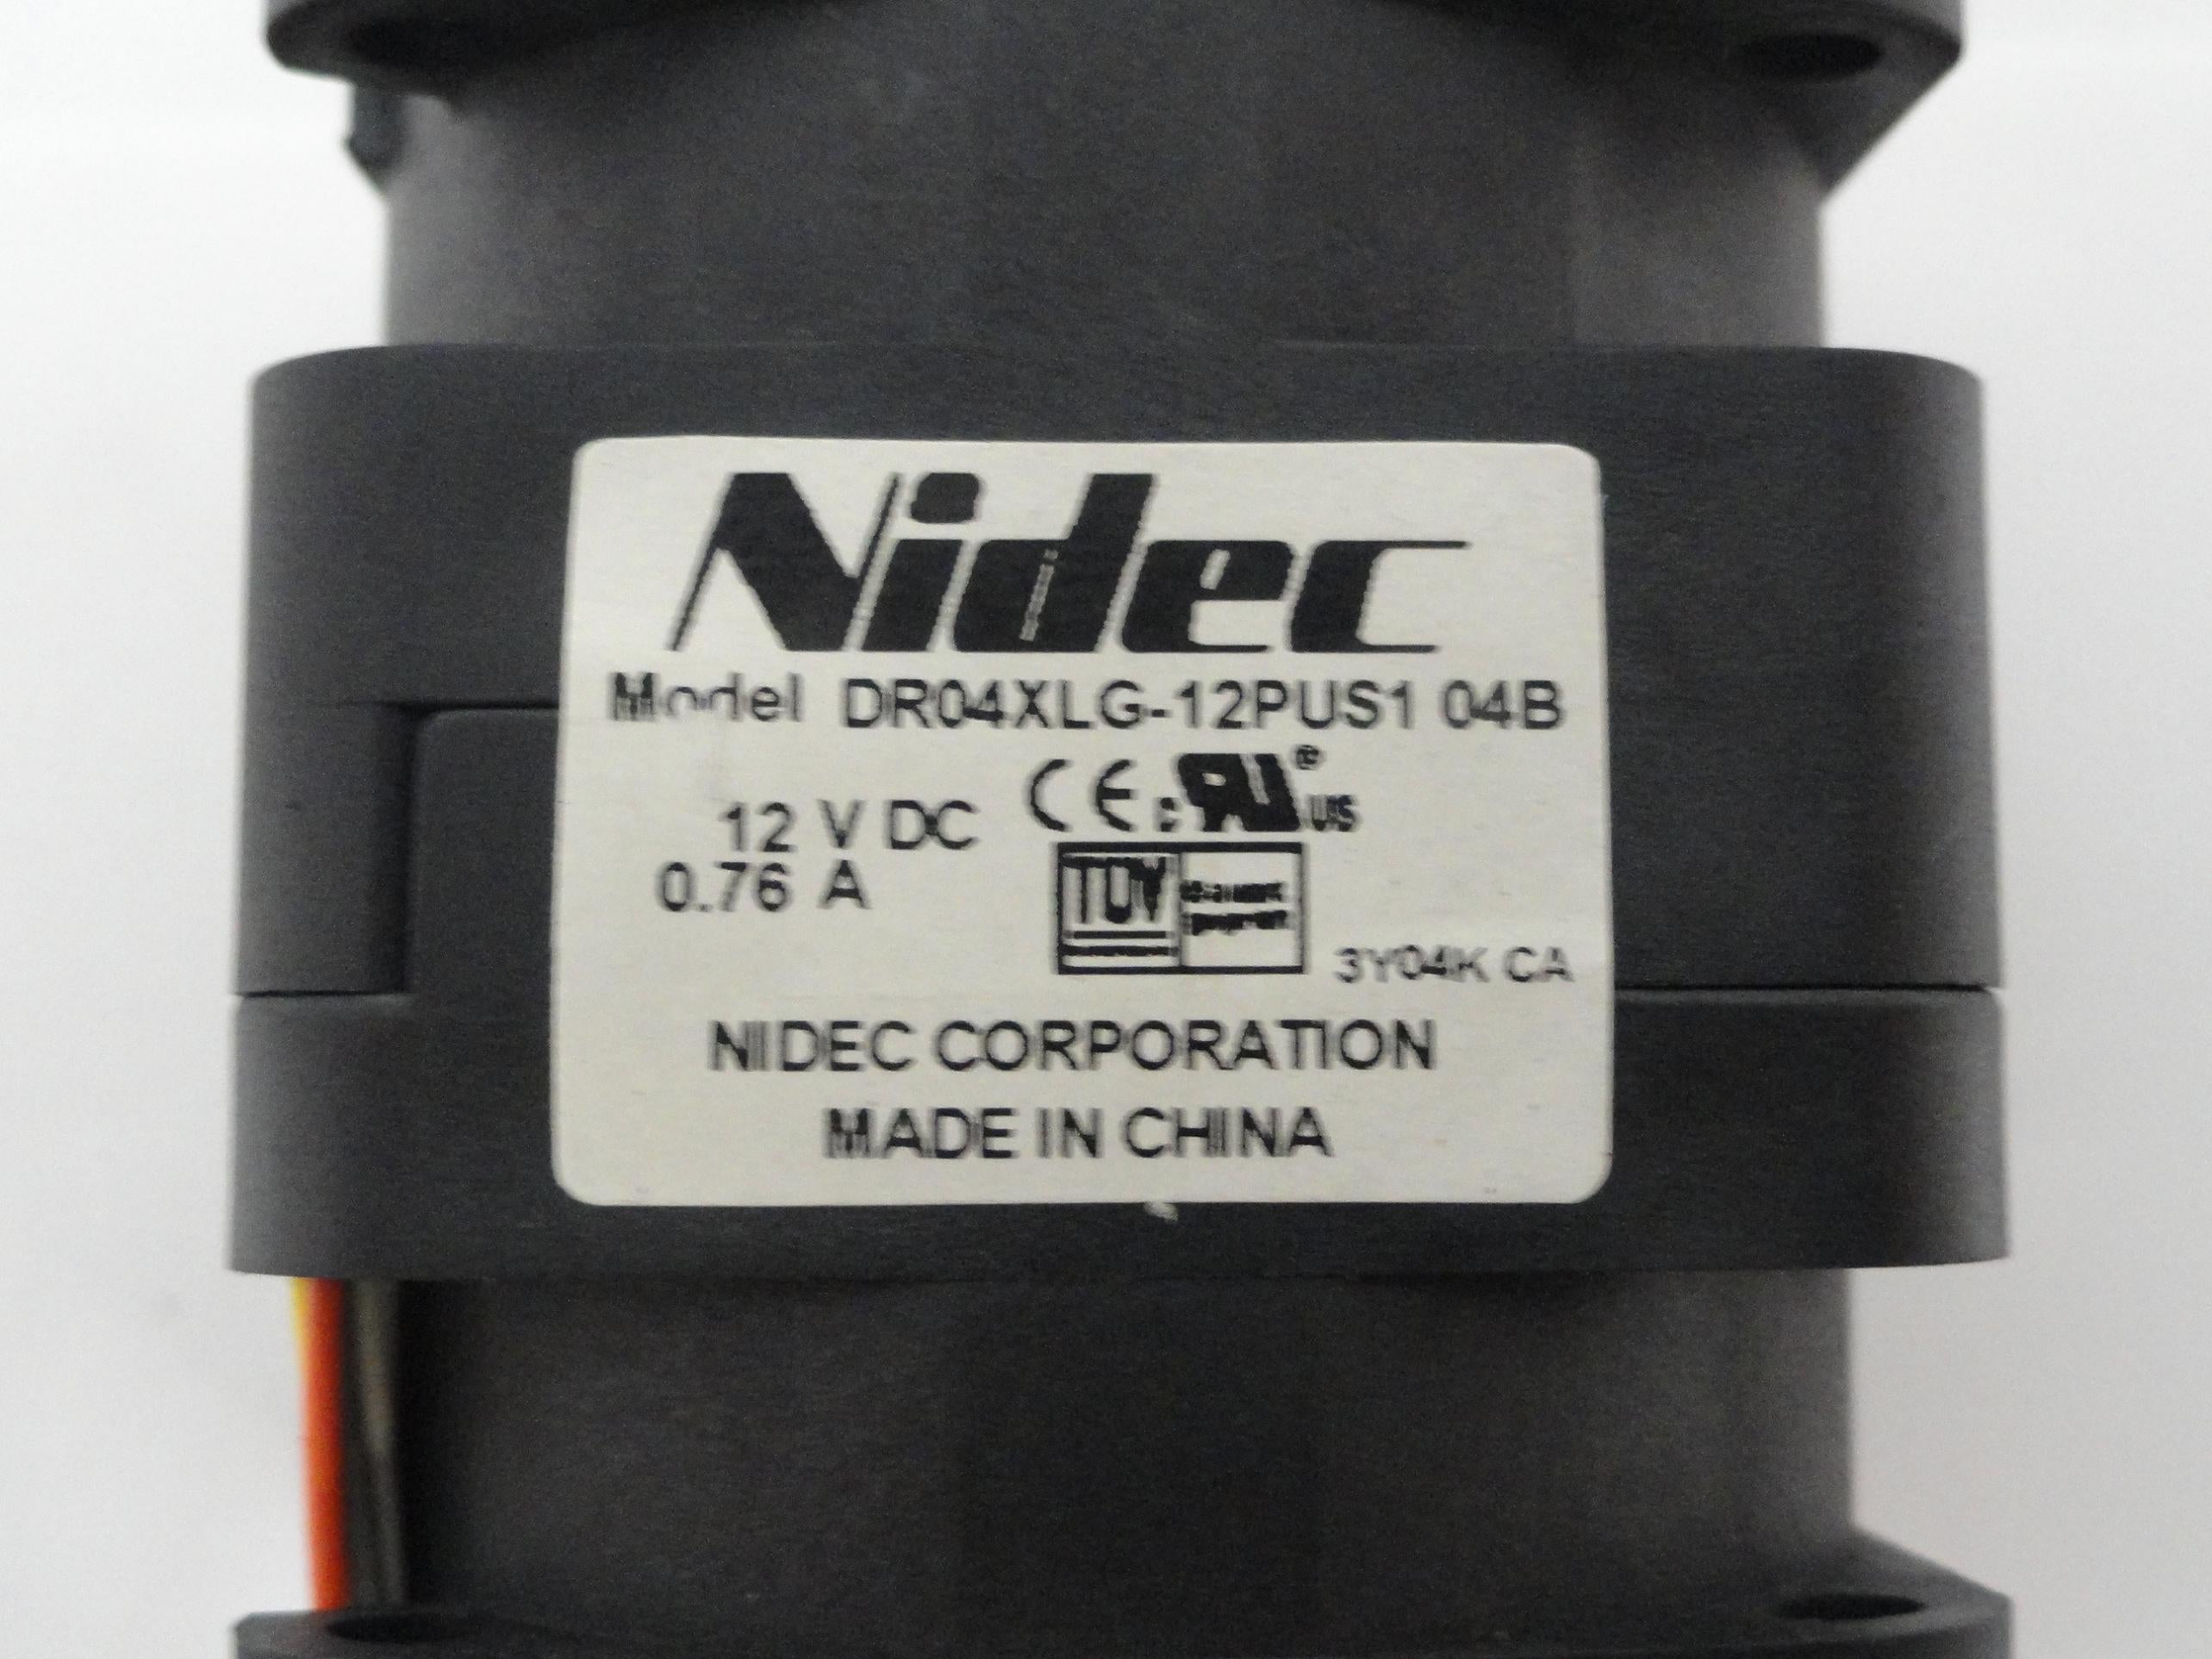 PR17019_DR04XLG-12PUS1_Nidec 40mm Chassis Fan - Image2